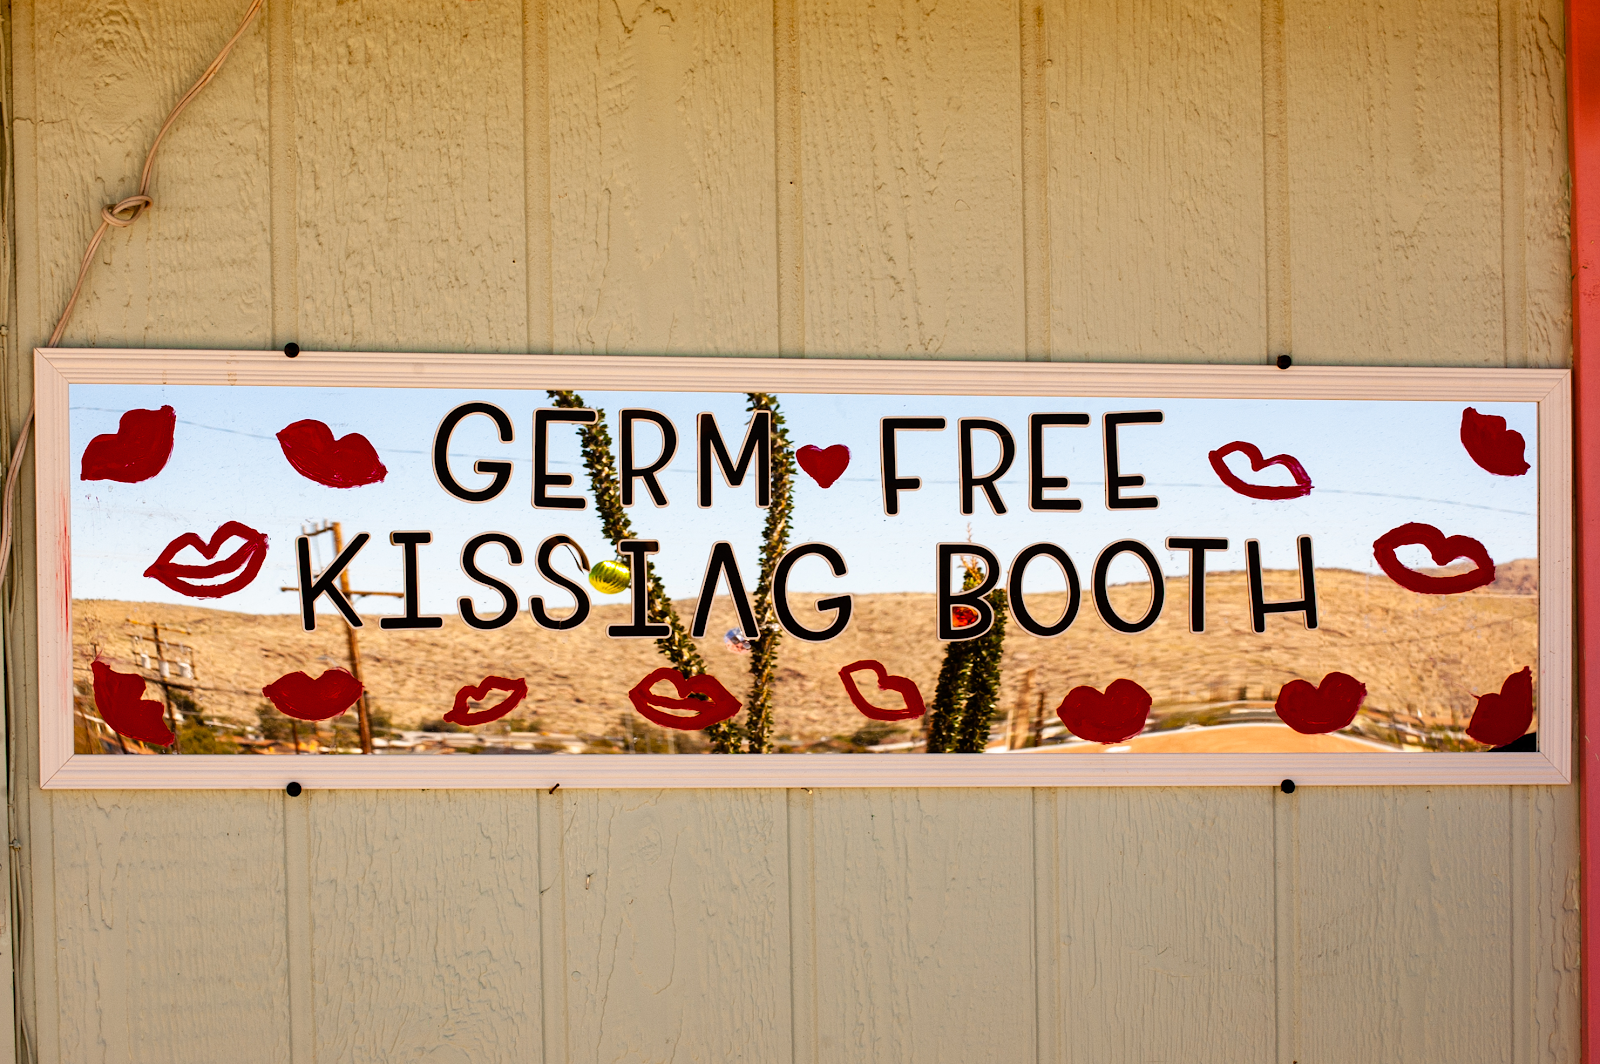 A mirror, laid sideways, and painted with a series of red lips, says "Germ Free Kissing Booth" in black letter across it. It is mounted on an exterior wall of the Beauty Bubble hair salon, Joshua Tree, California. April 24, 2020. (Julie Dole/Pirate)